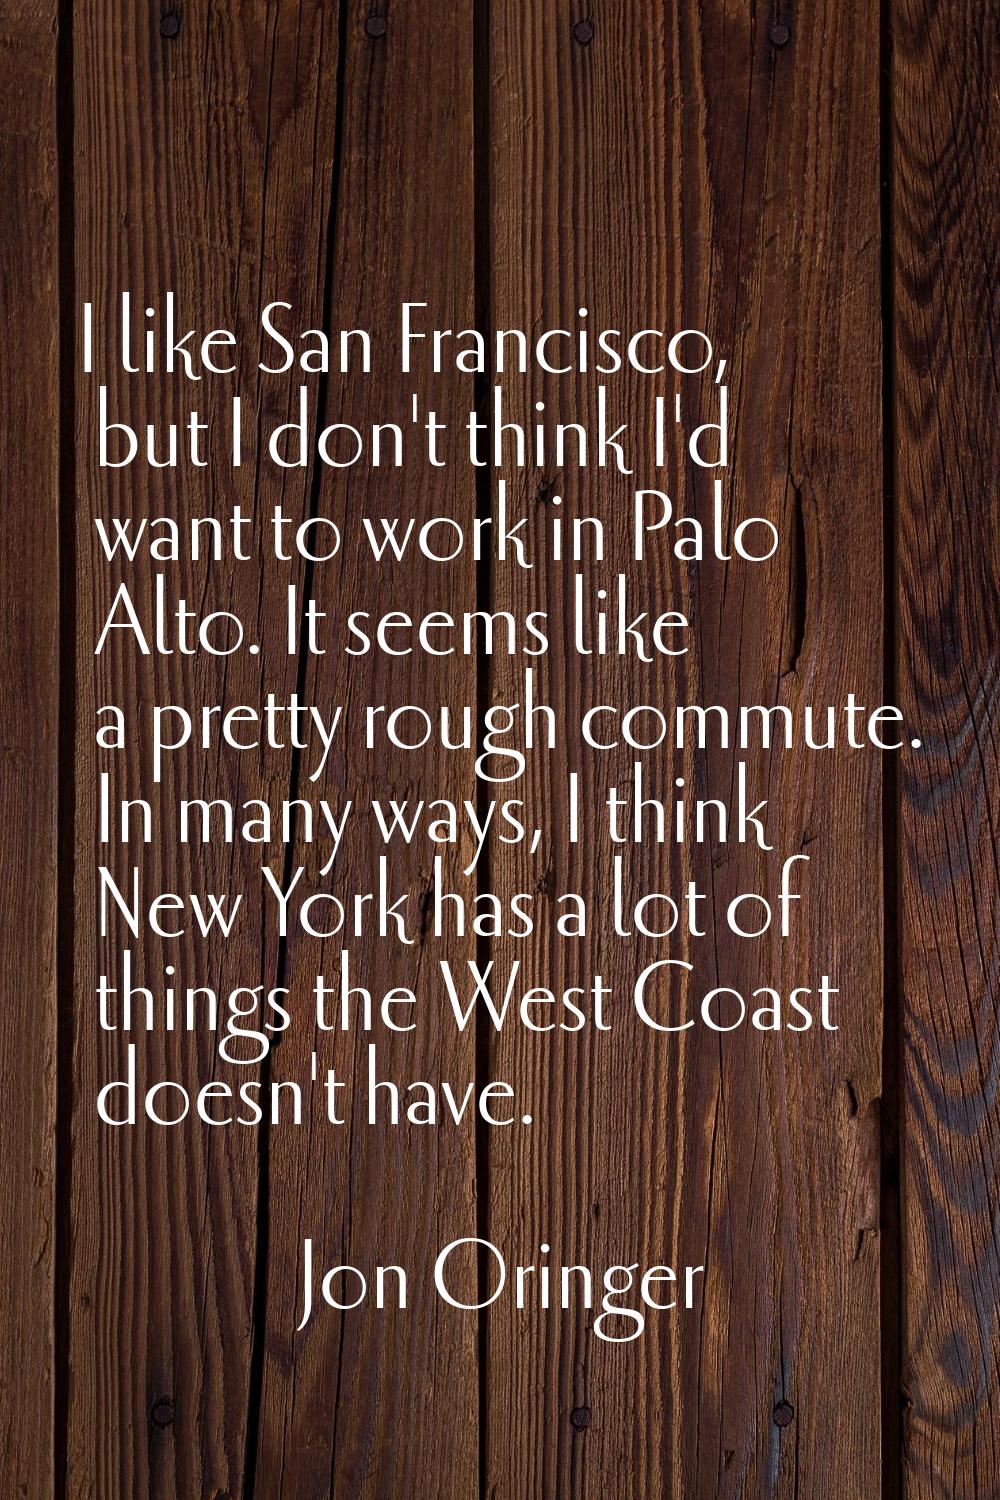 I like San Francisco, but I don't think I'd want to work in Palo Alto. It seems like a pretty rough